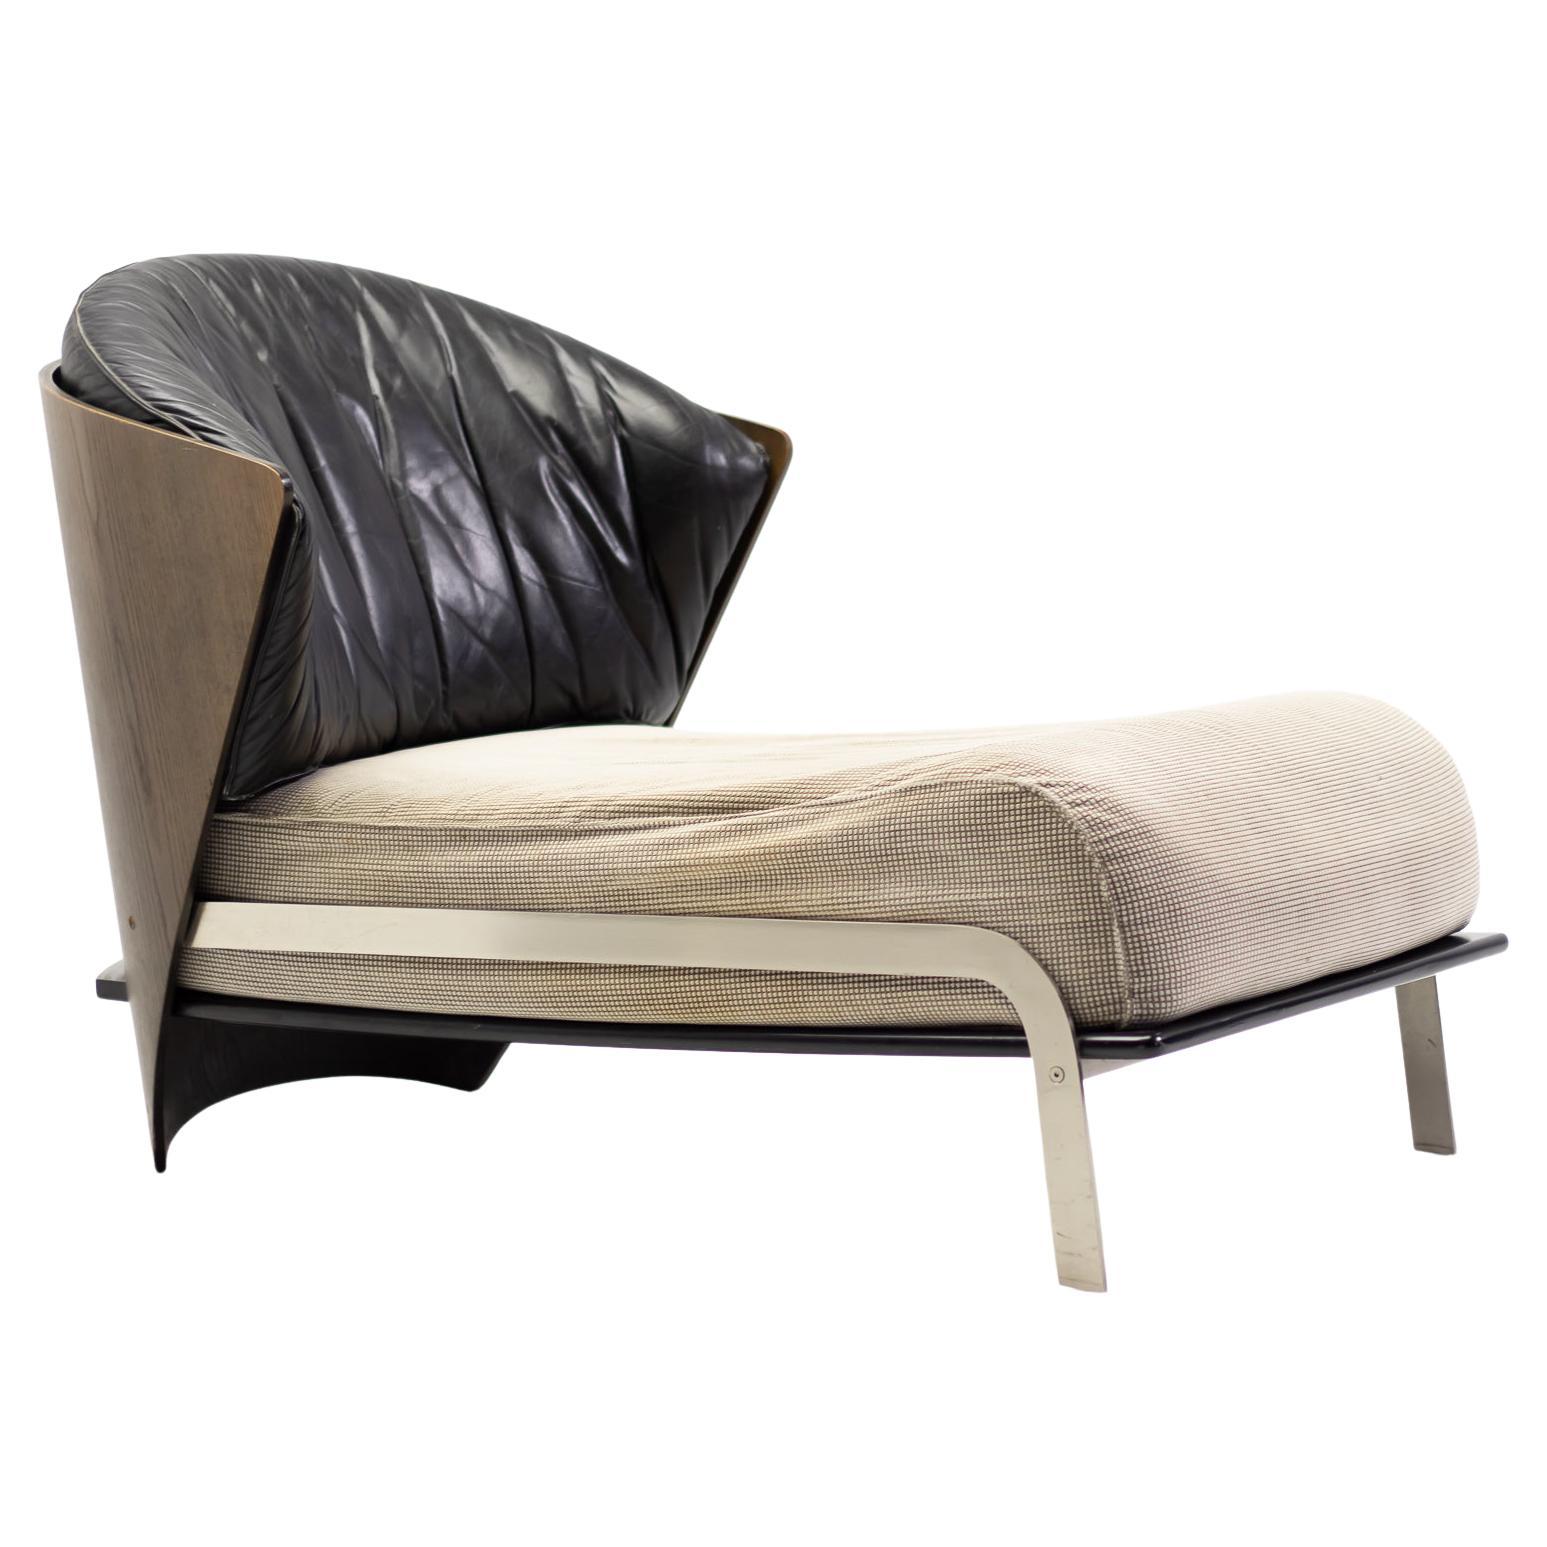 Cappellini "Elba Lunga" Chaise by Franco Raggi For Sale at 1stDibs